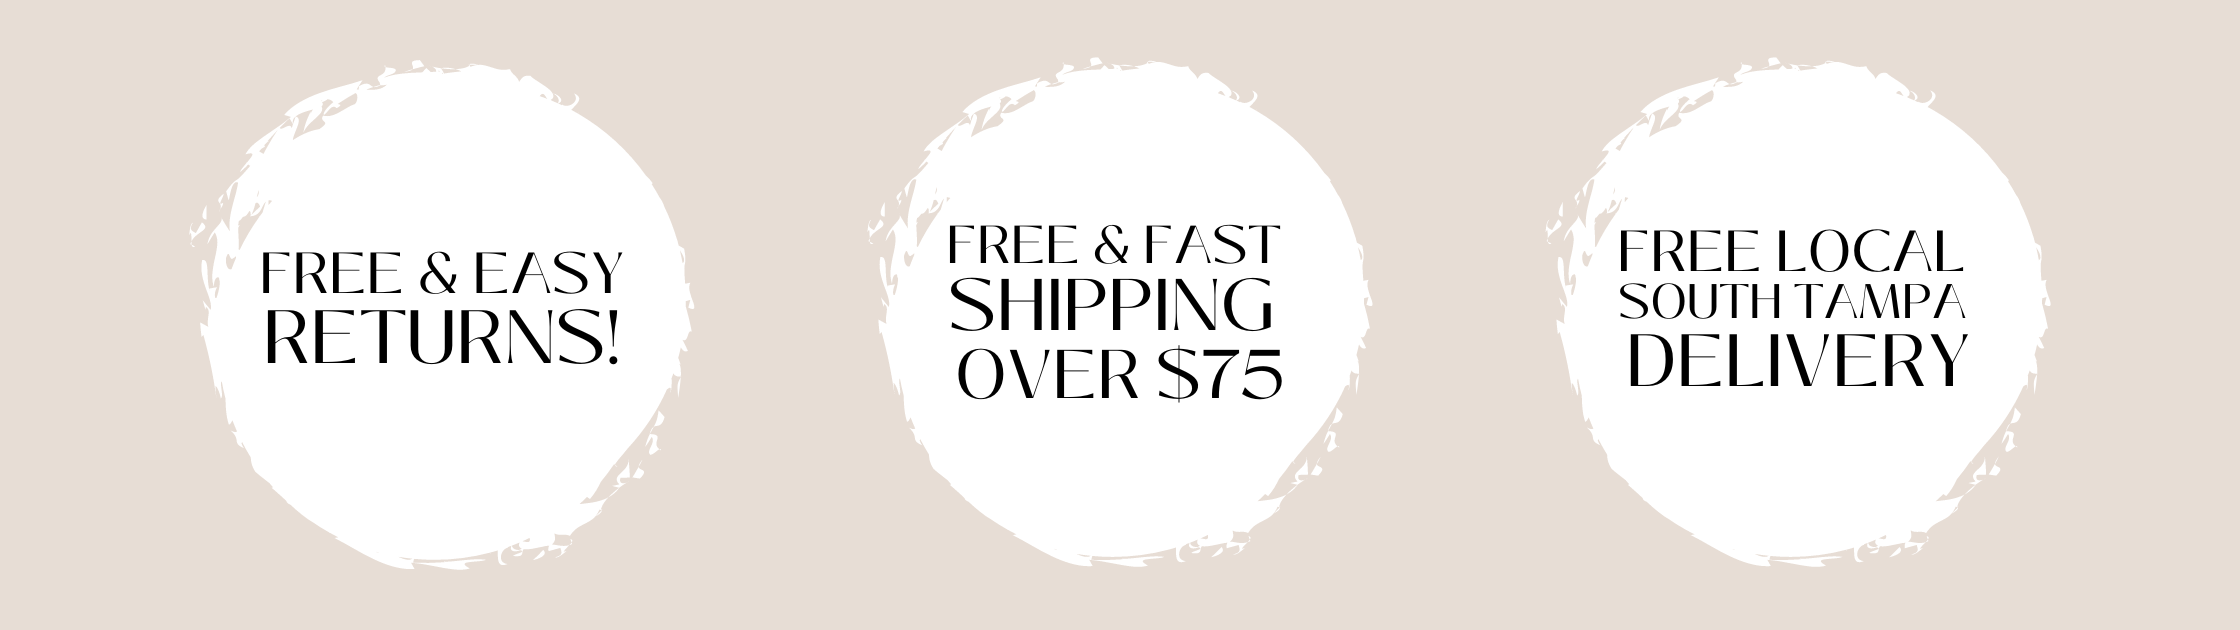 FREE & EASY RETURNS, FREE & FAST SHIPPING OVER $75, FREE LOCAL SOUTH TAMPA DELIVERY!